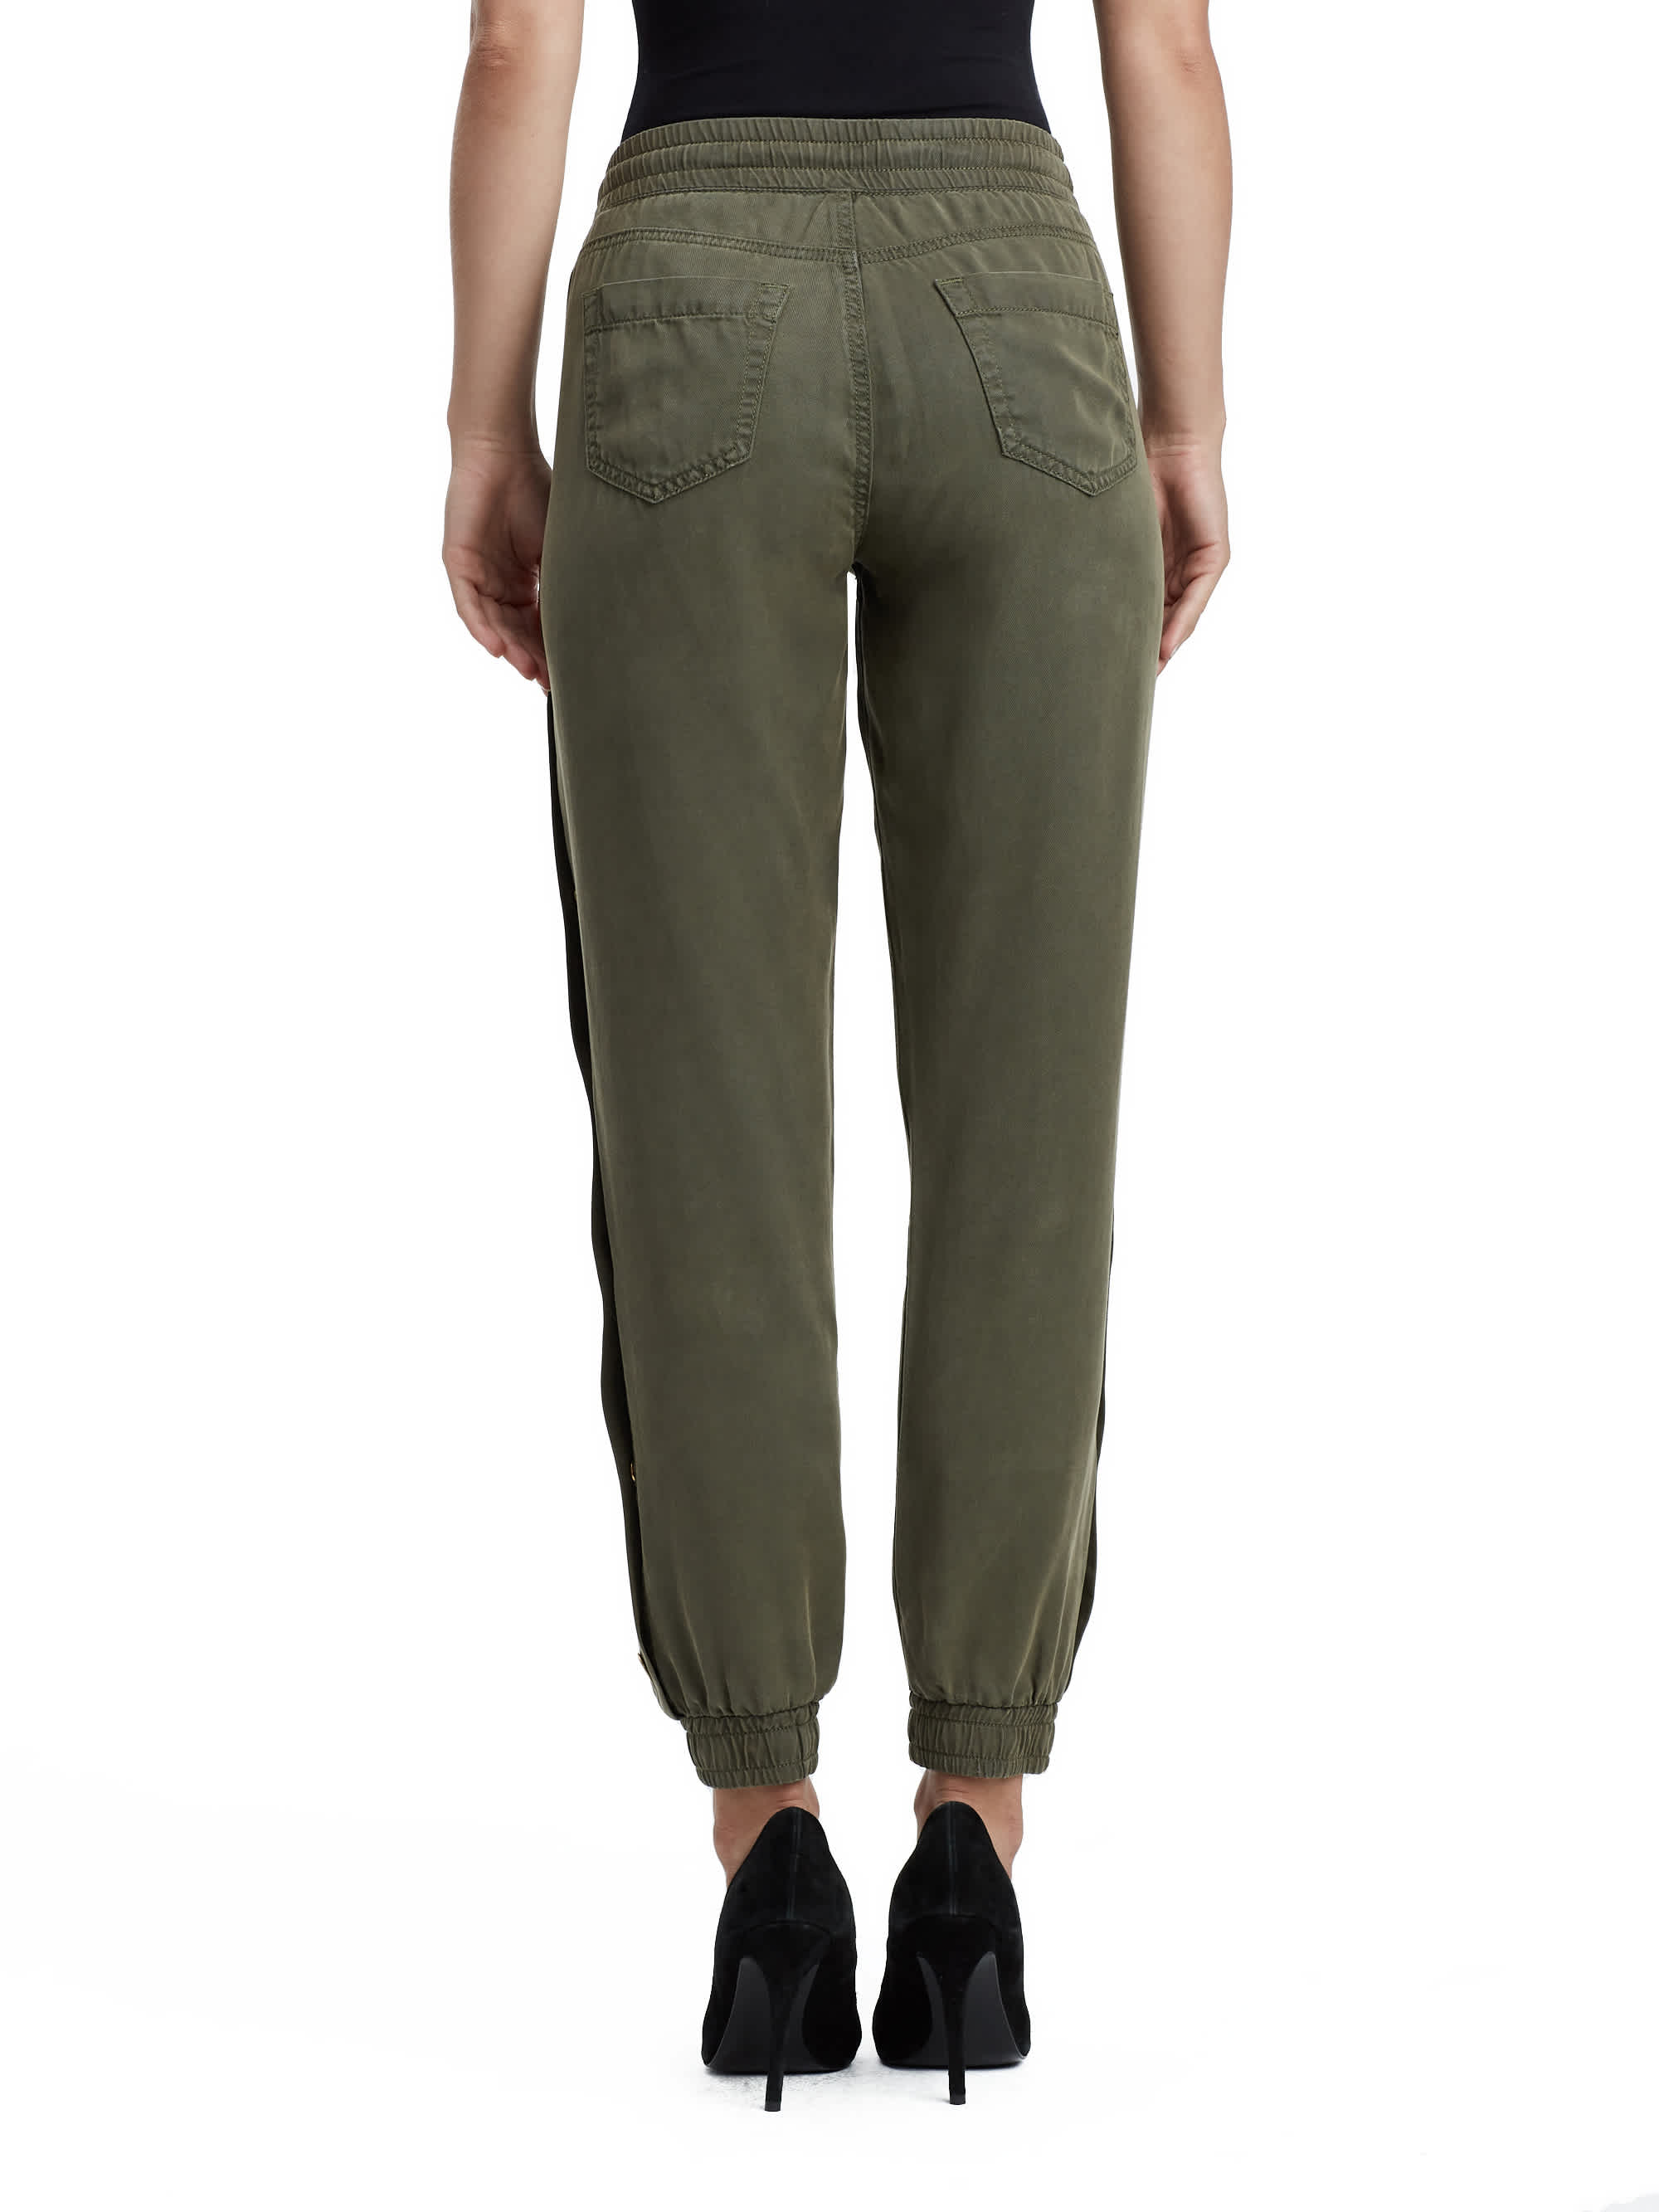 WOMENS MILITARY JOGGER